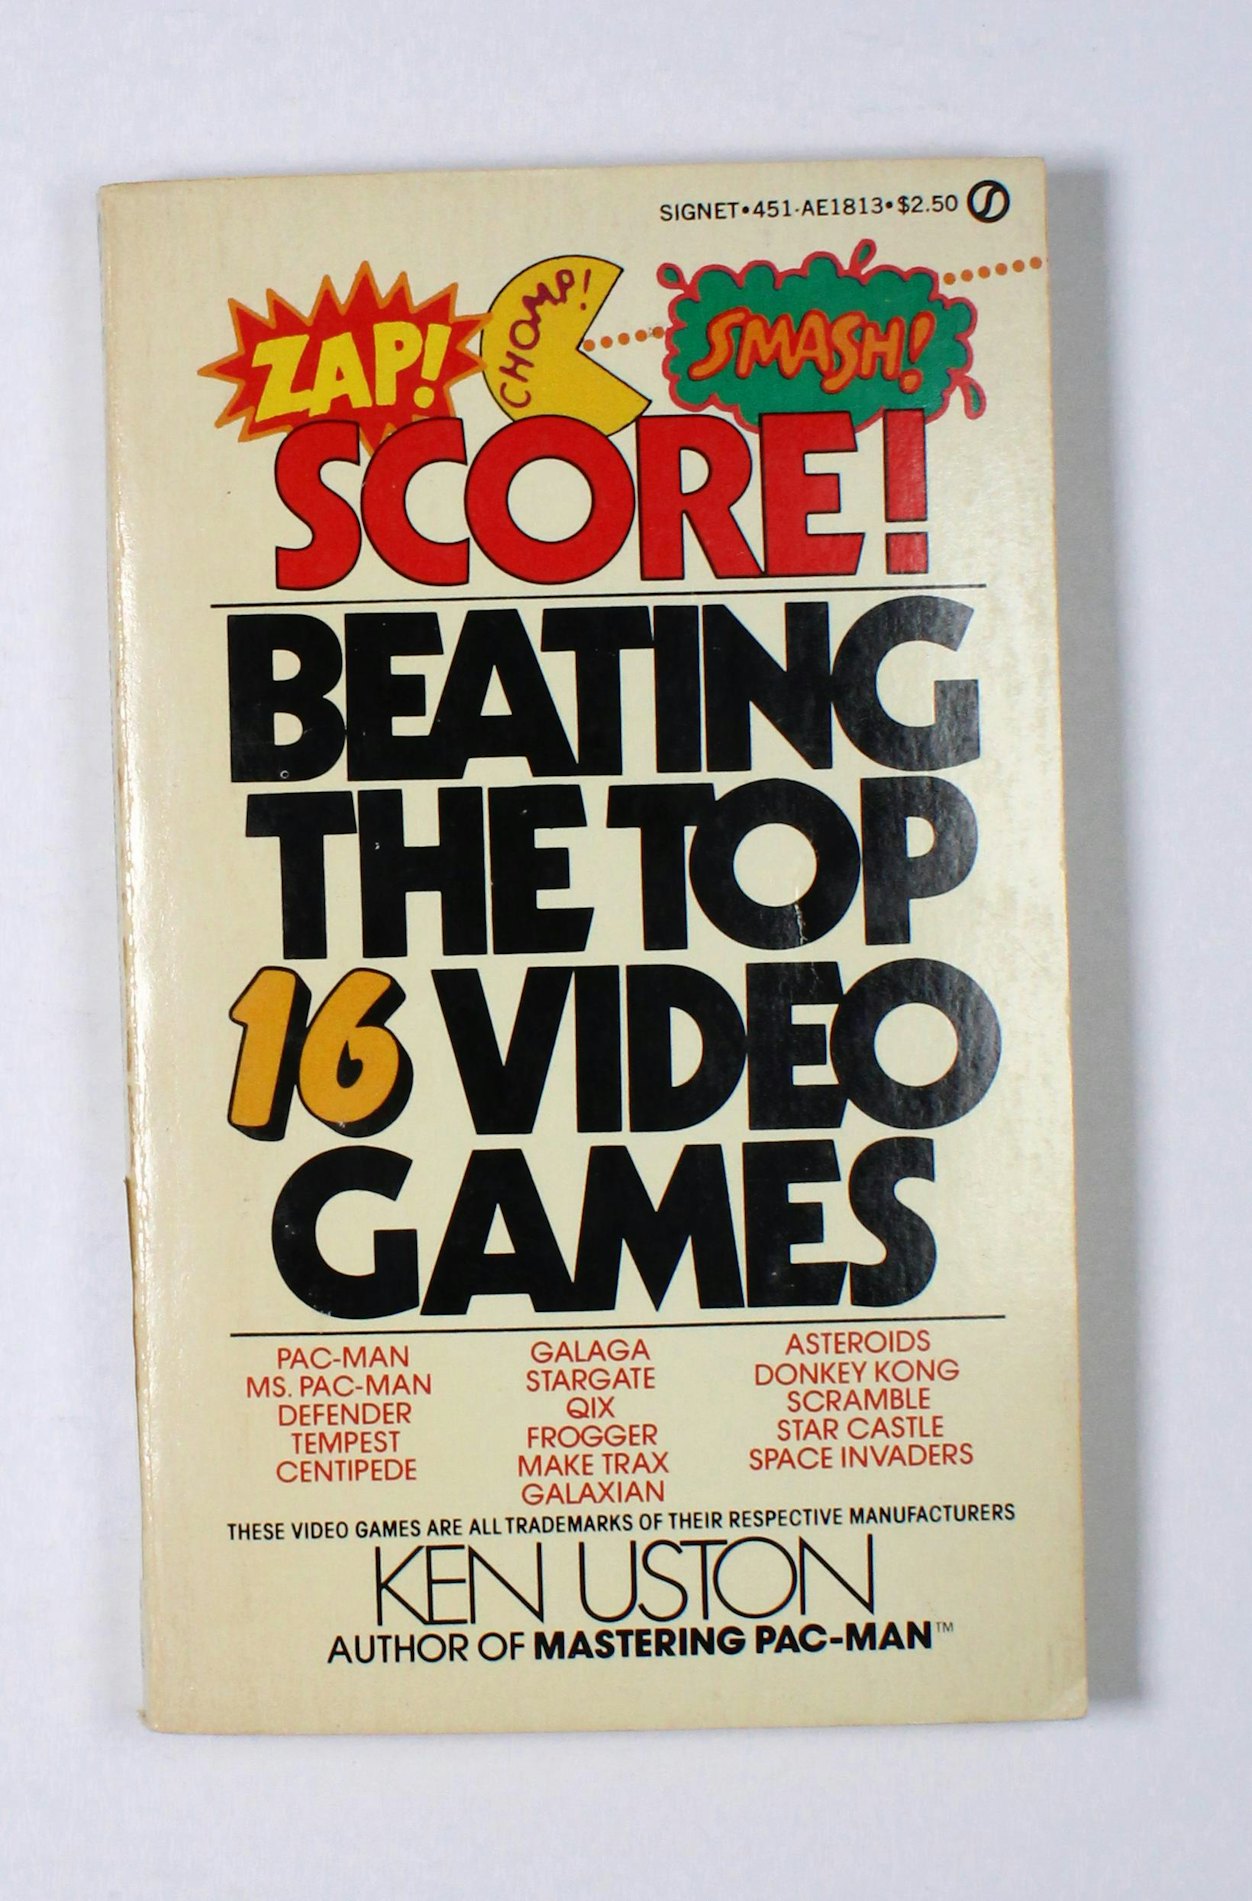 Score! Beating the Top 16 Video Games